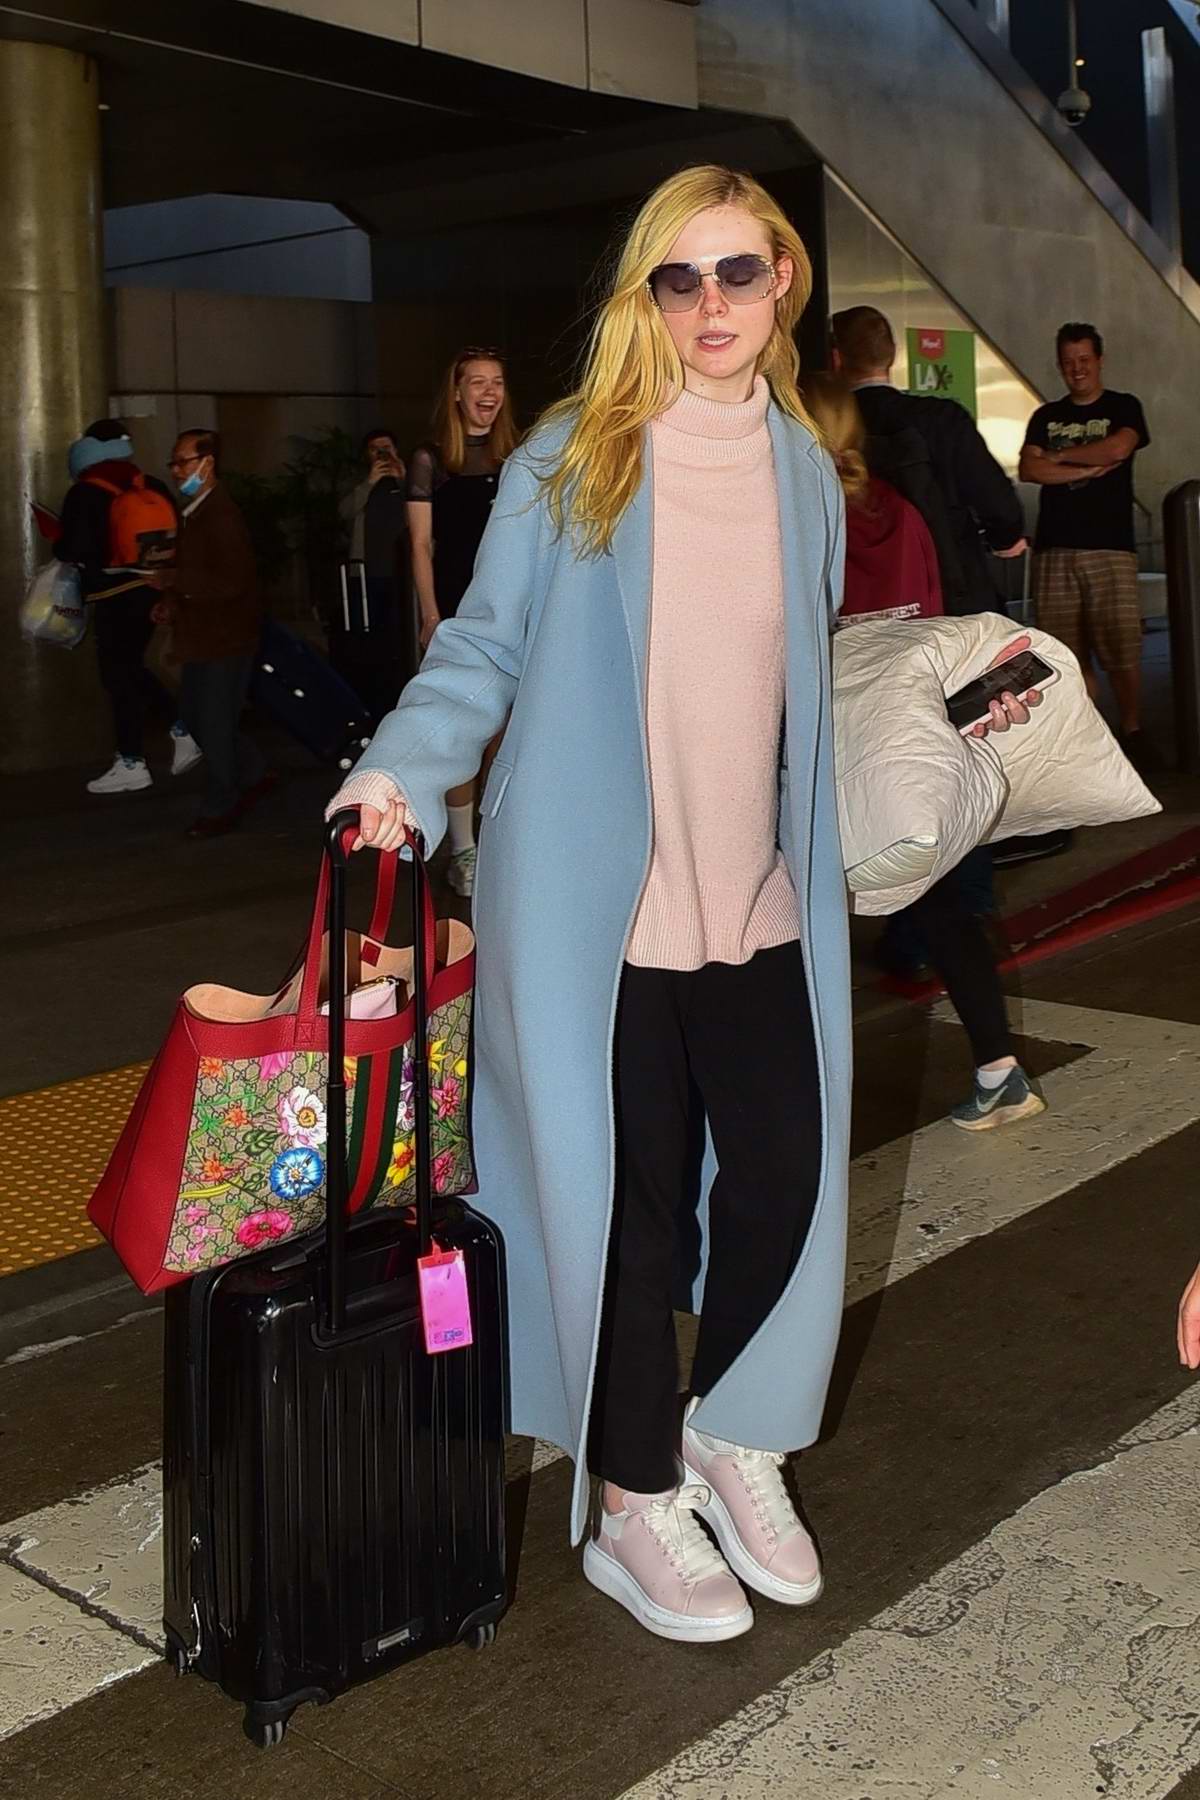 Elle Fanning carries a colorful Gucci bag as she touches down at LAX airport  in Los